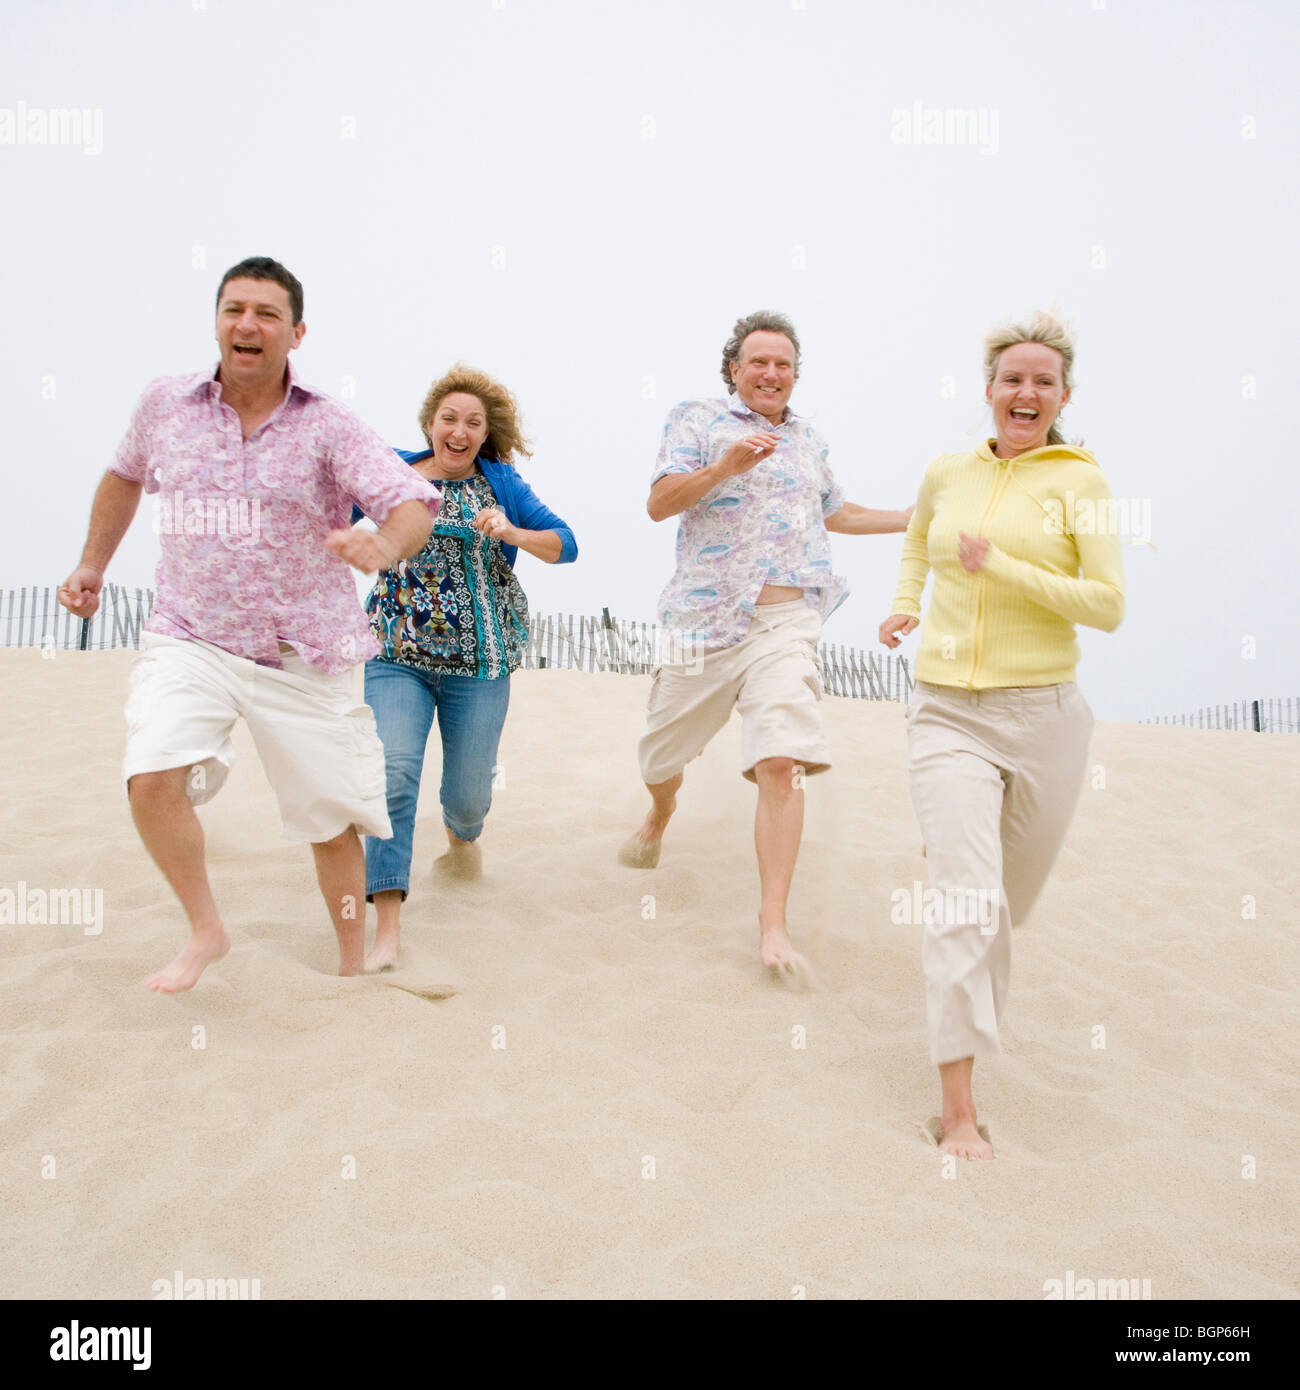 Two couples running on the beach Stock Photo